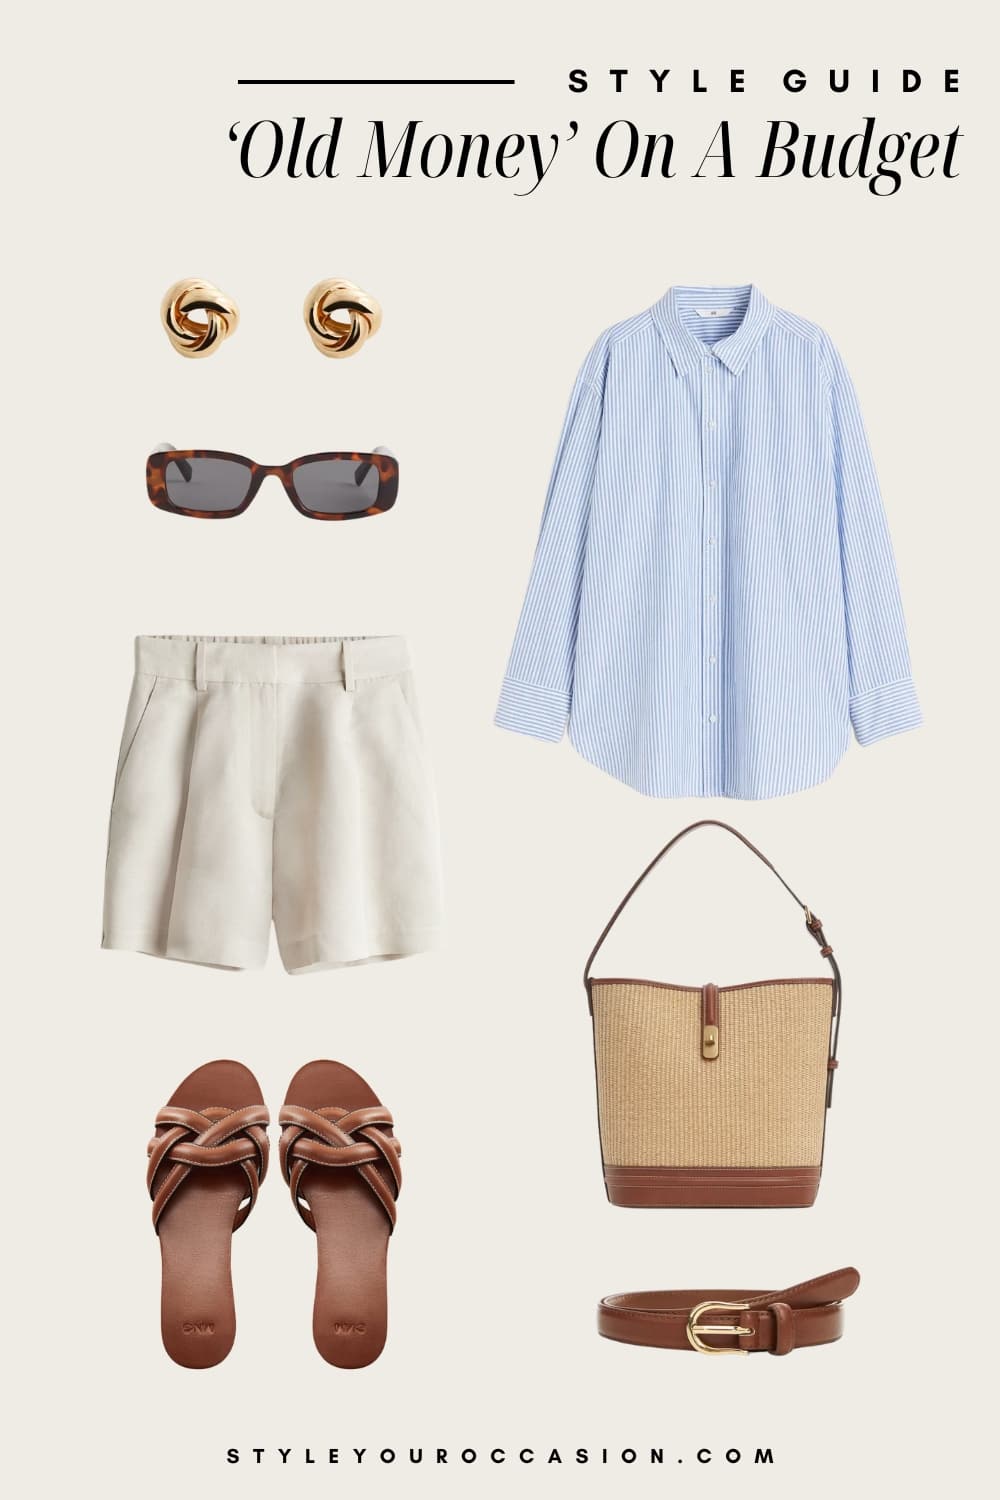 an image board of an old money outfit featuring pleated off-white shorts, a white and blue striped button-up, cognac leather sandals, and leather and gold accessories